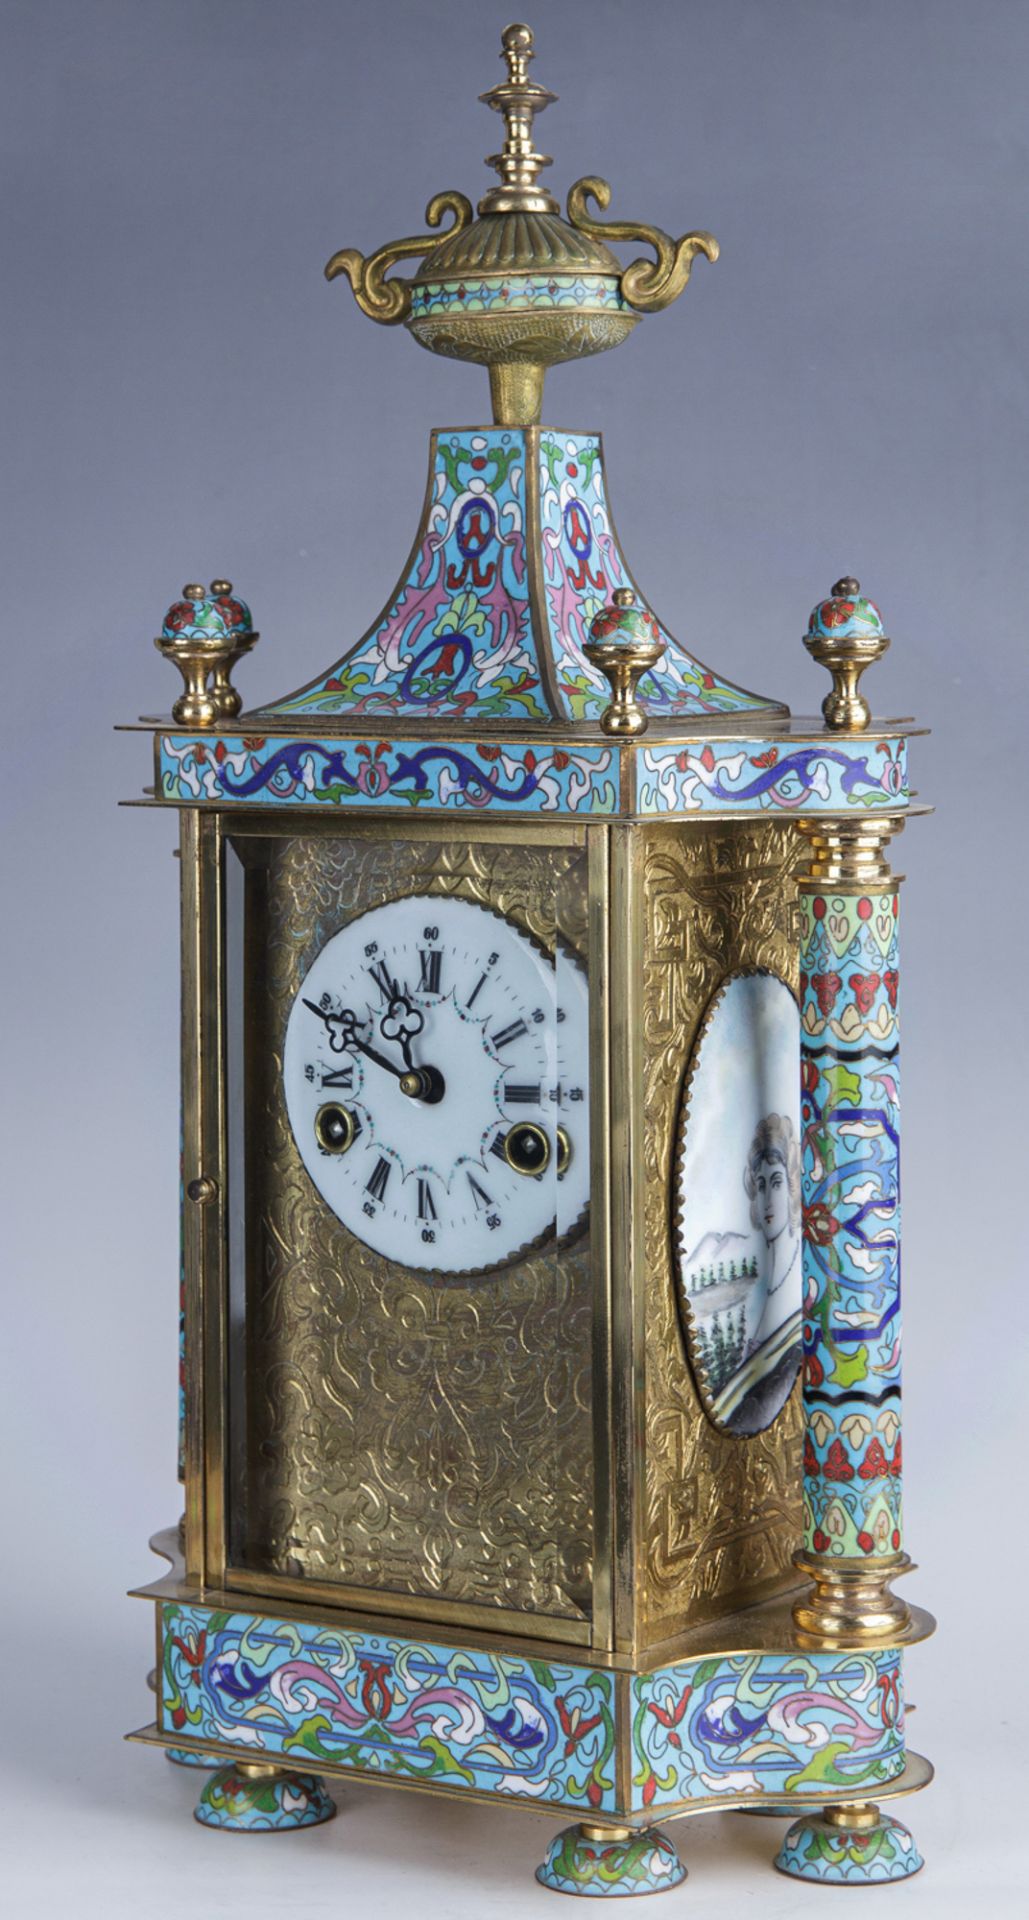 Cloisonné-Pendule mit Emailmalerei, China, 20. Jh. - Image 3 of 7